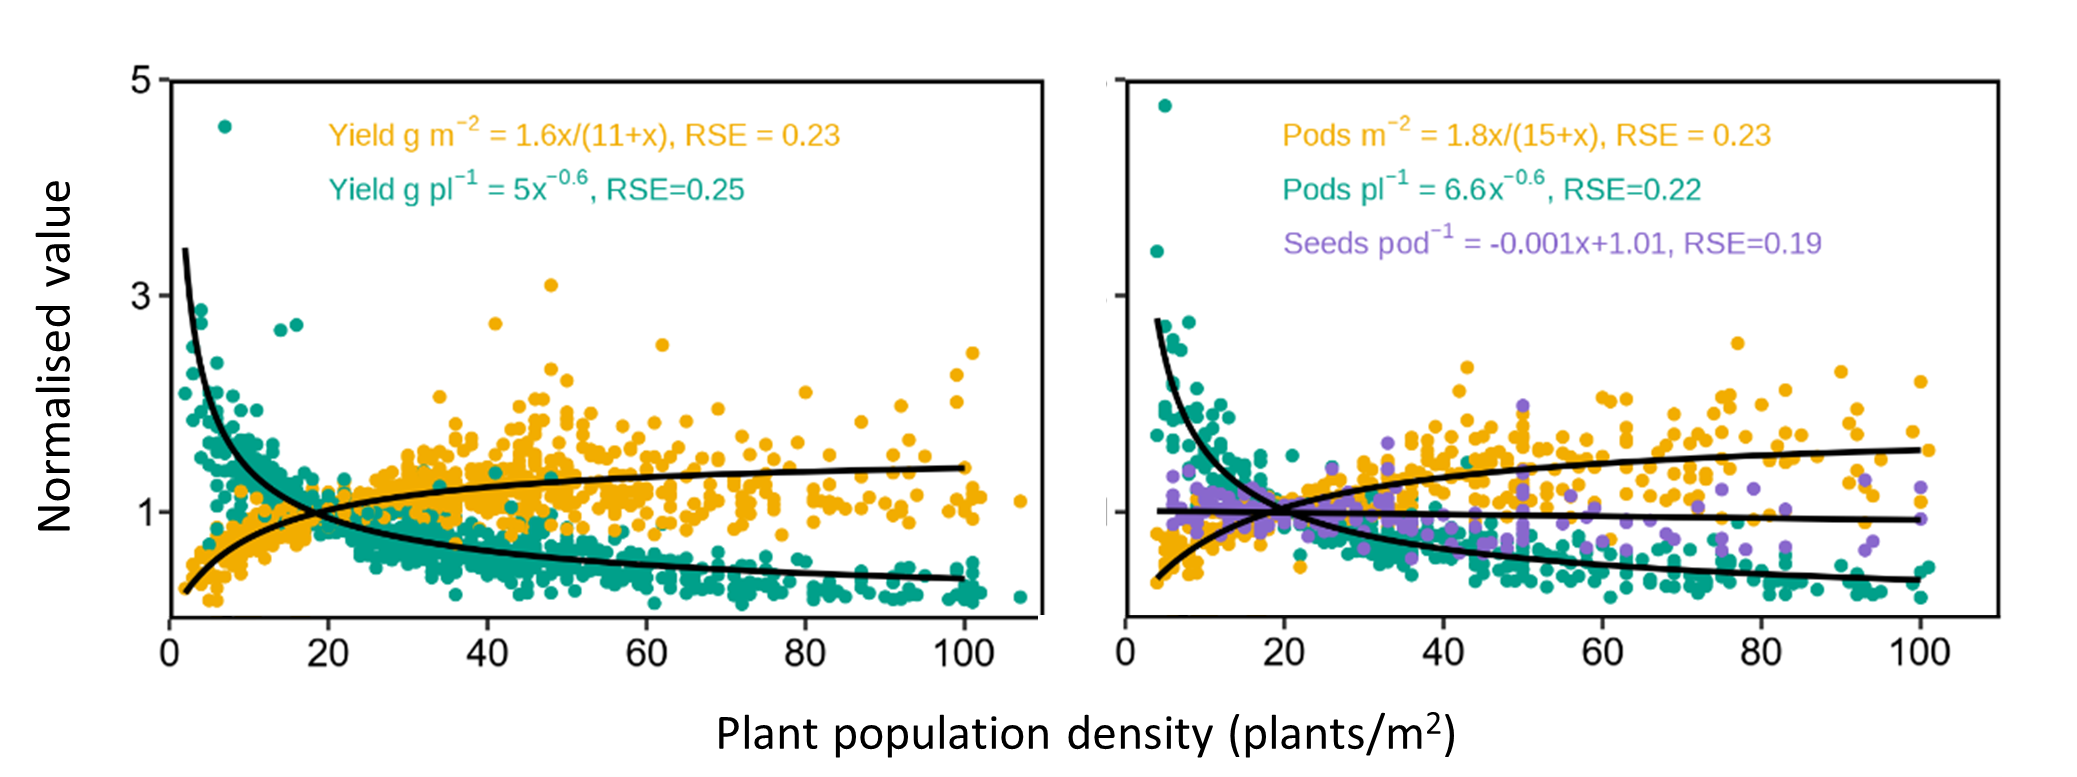 Faba bean crop and plant responses of (a) yield and (b) pod number to plant population density, from a database of 204 responses (126 of which are from Australia). Traits are normalised by their value at 20 plants/m2 (for example, ‘3’ is three times larger than the response’s 20 plants/m2 value). Yellow symbols are traits with area-based units (/m2), green symbols have units of /plant1, and purple symbols have other units. Curves are Michaelis-Menten models for /m2 traits, power models for /plant traits, and a linear model for seeds/pod. RSE is residual standard error of the normalised trait.